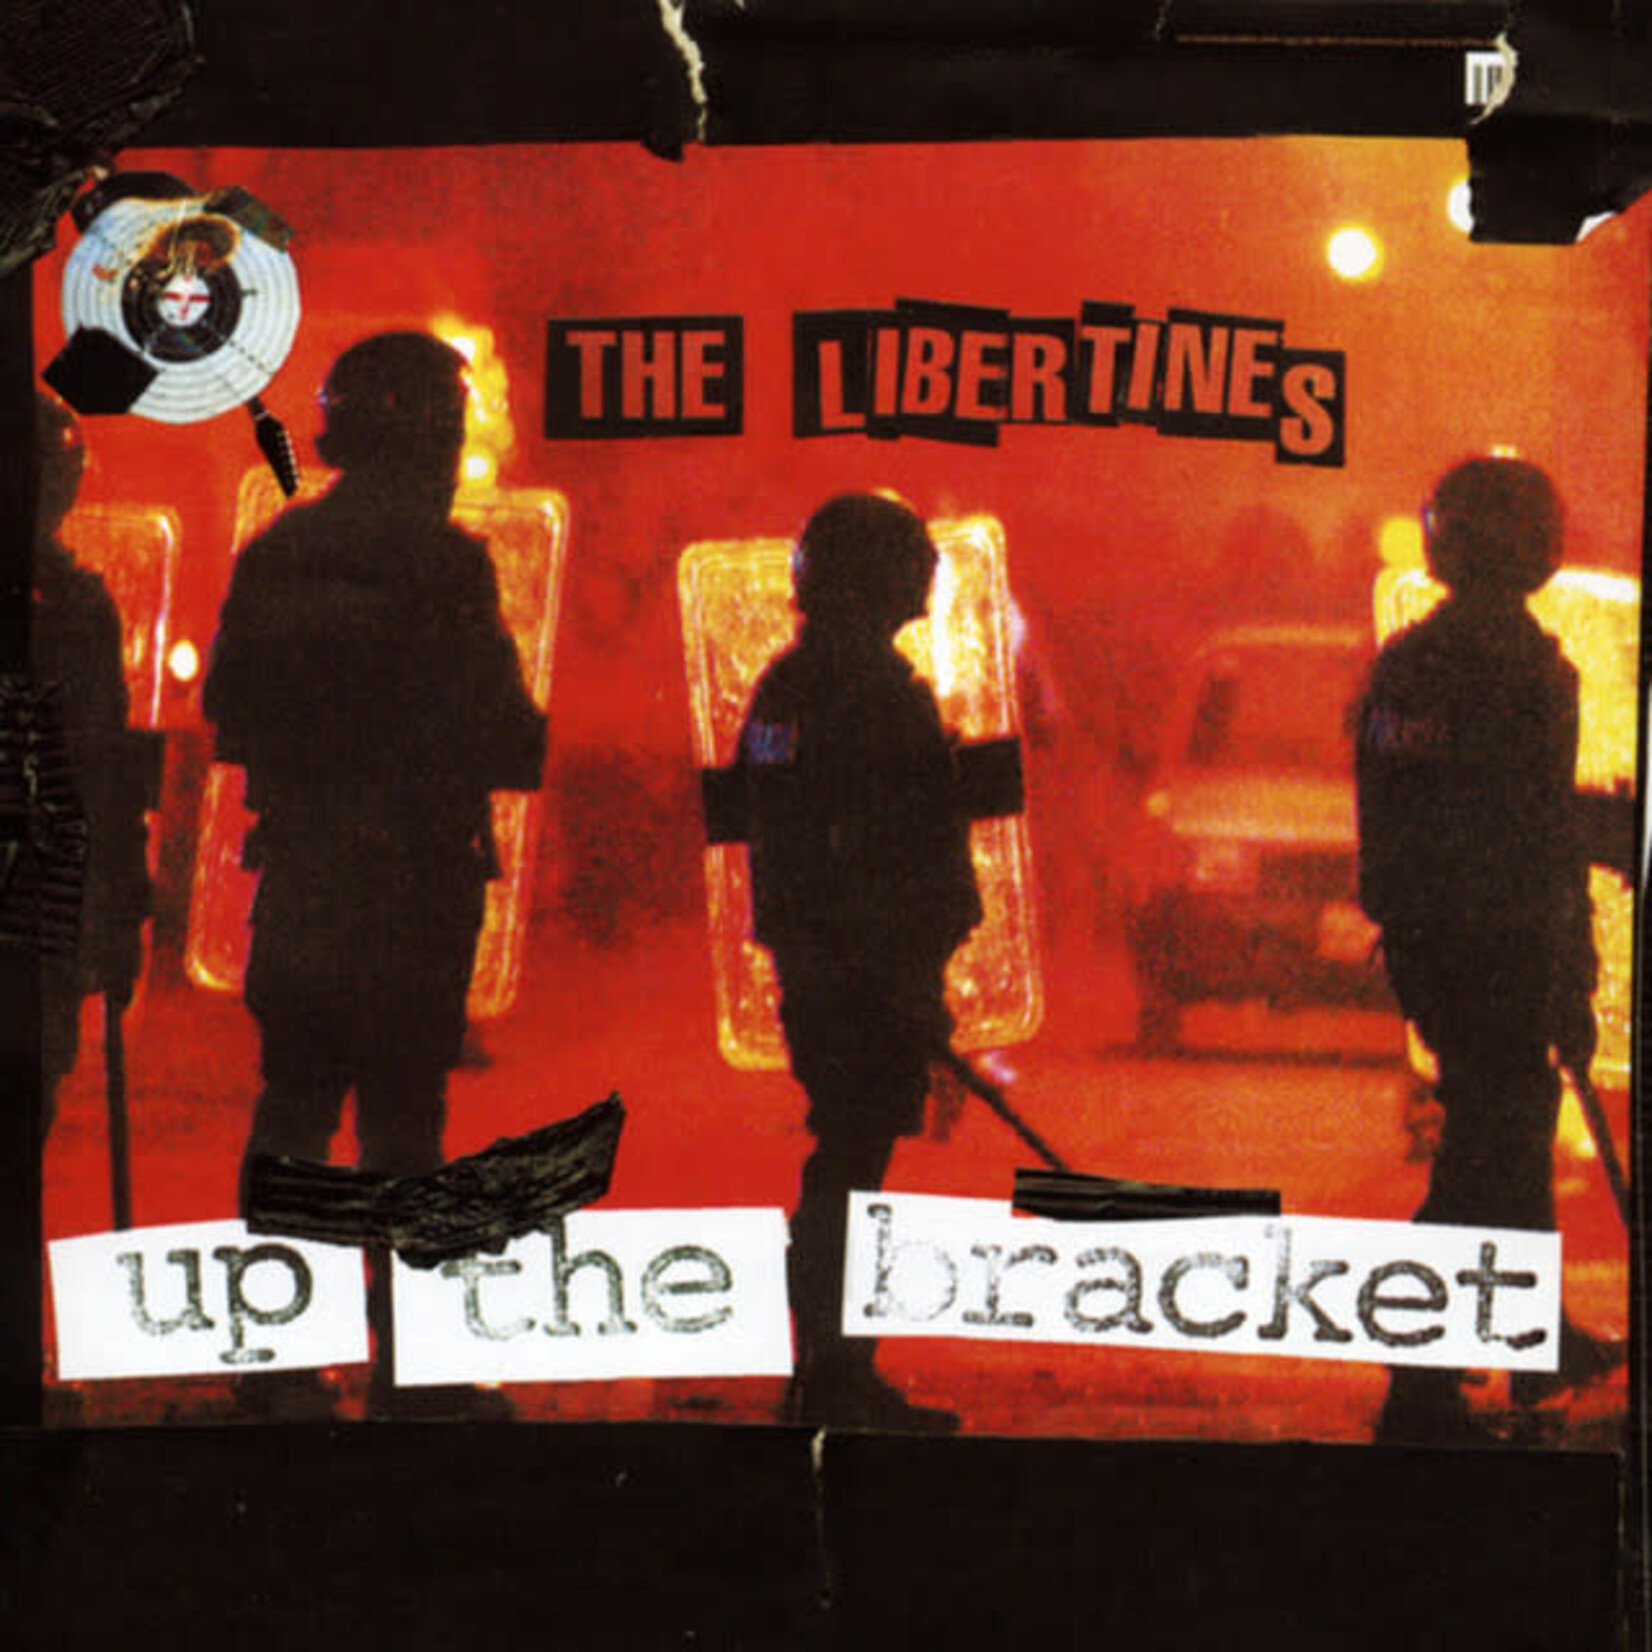 [New] Libertines: Up the Bracket (2LP, 20th Anniversary Edition) [ROUGH TRADE]